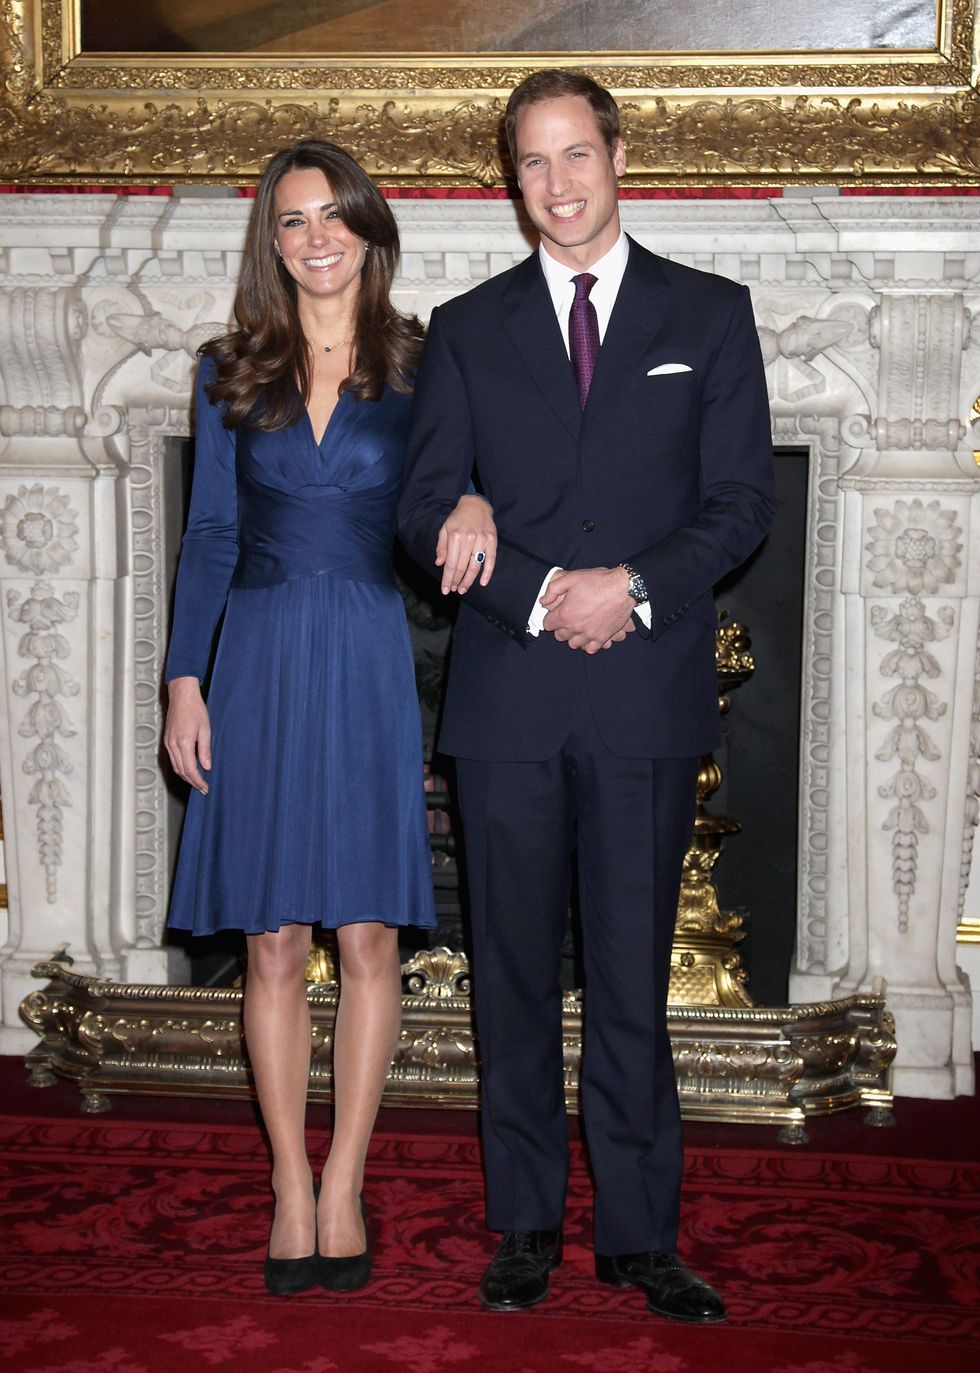 Kate Middleton engaged wearing a blue Issa dress